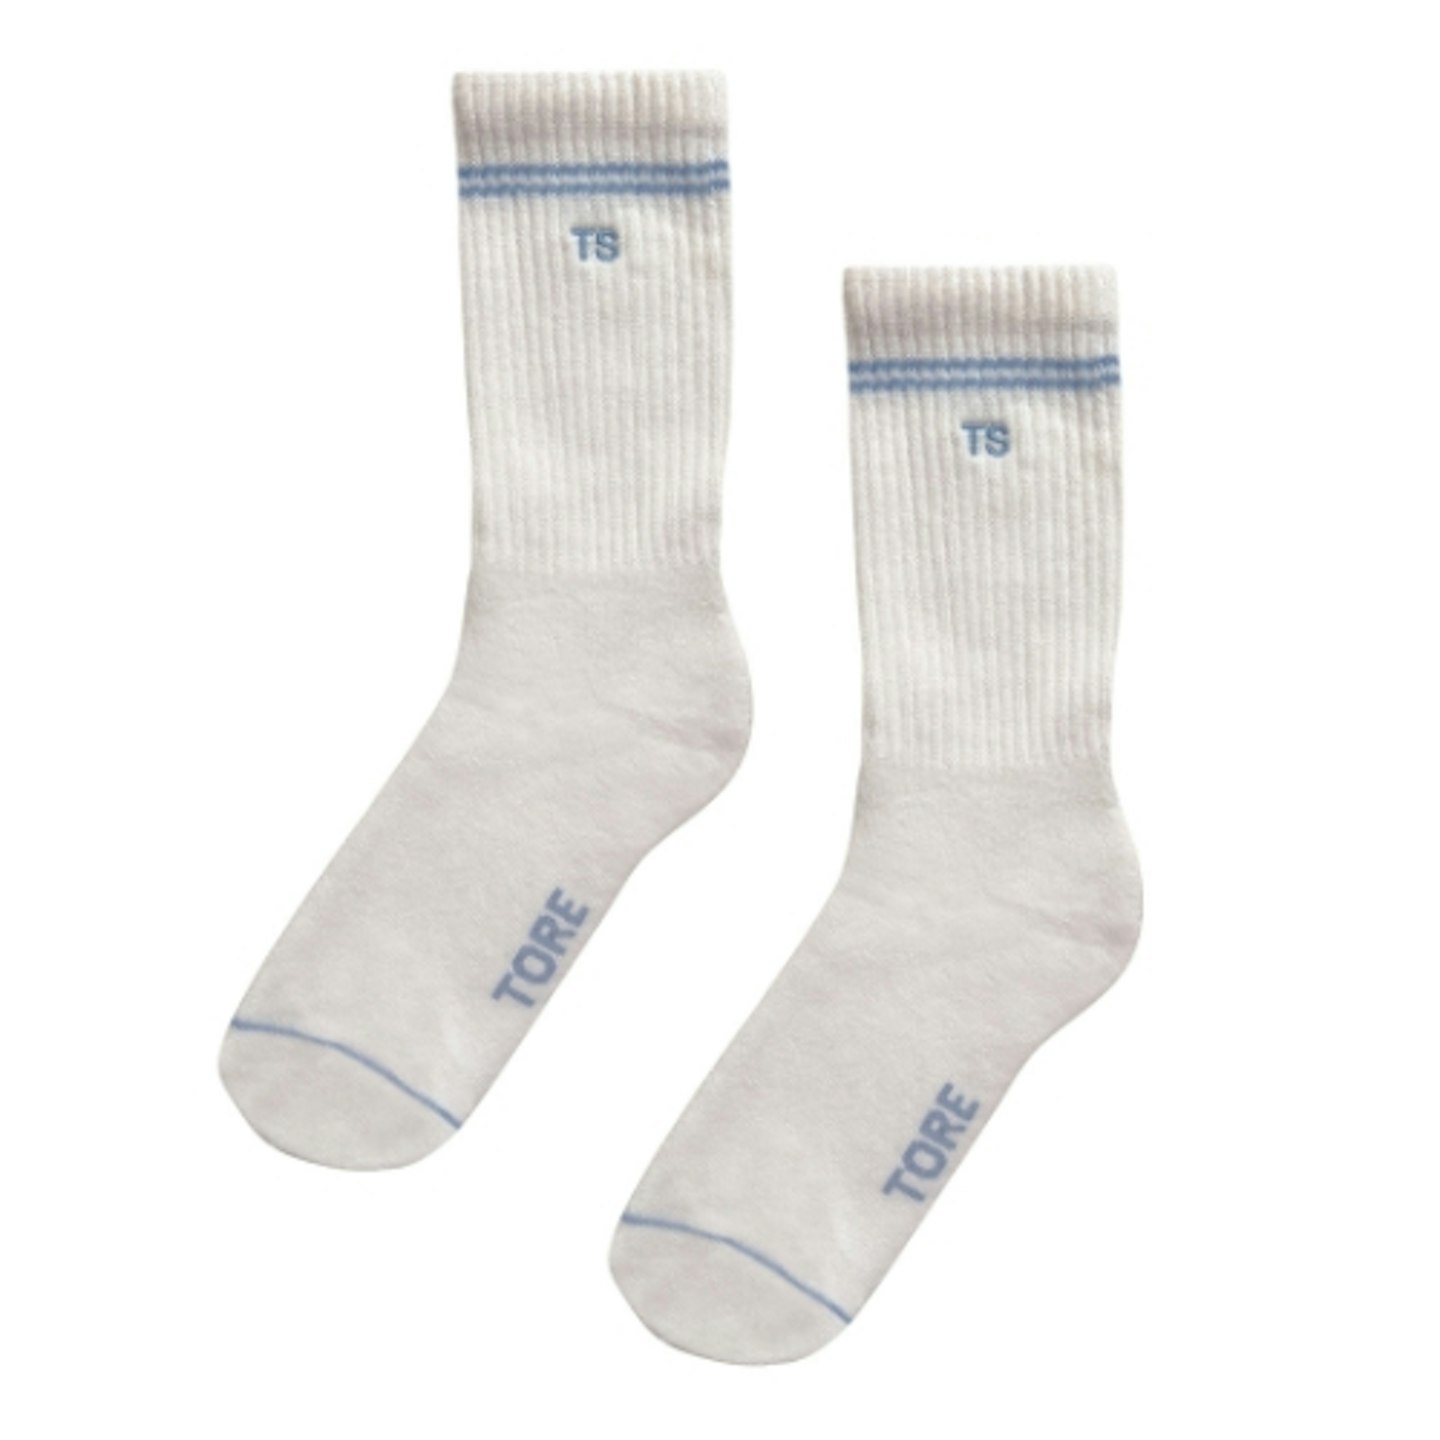 Men's Sustainable Socks with Initials